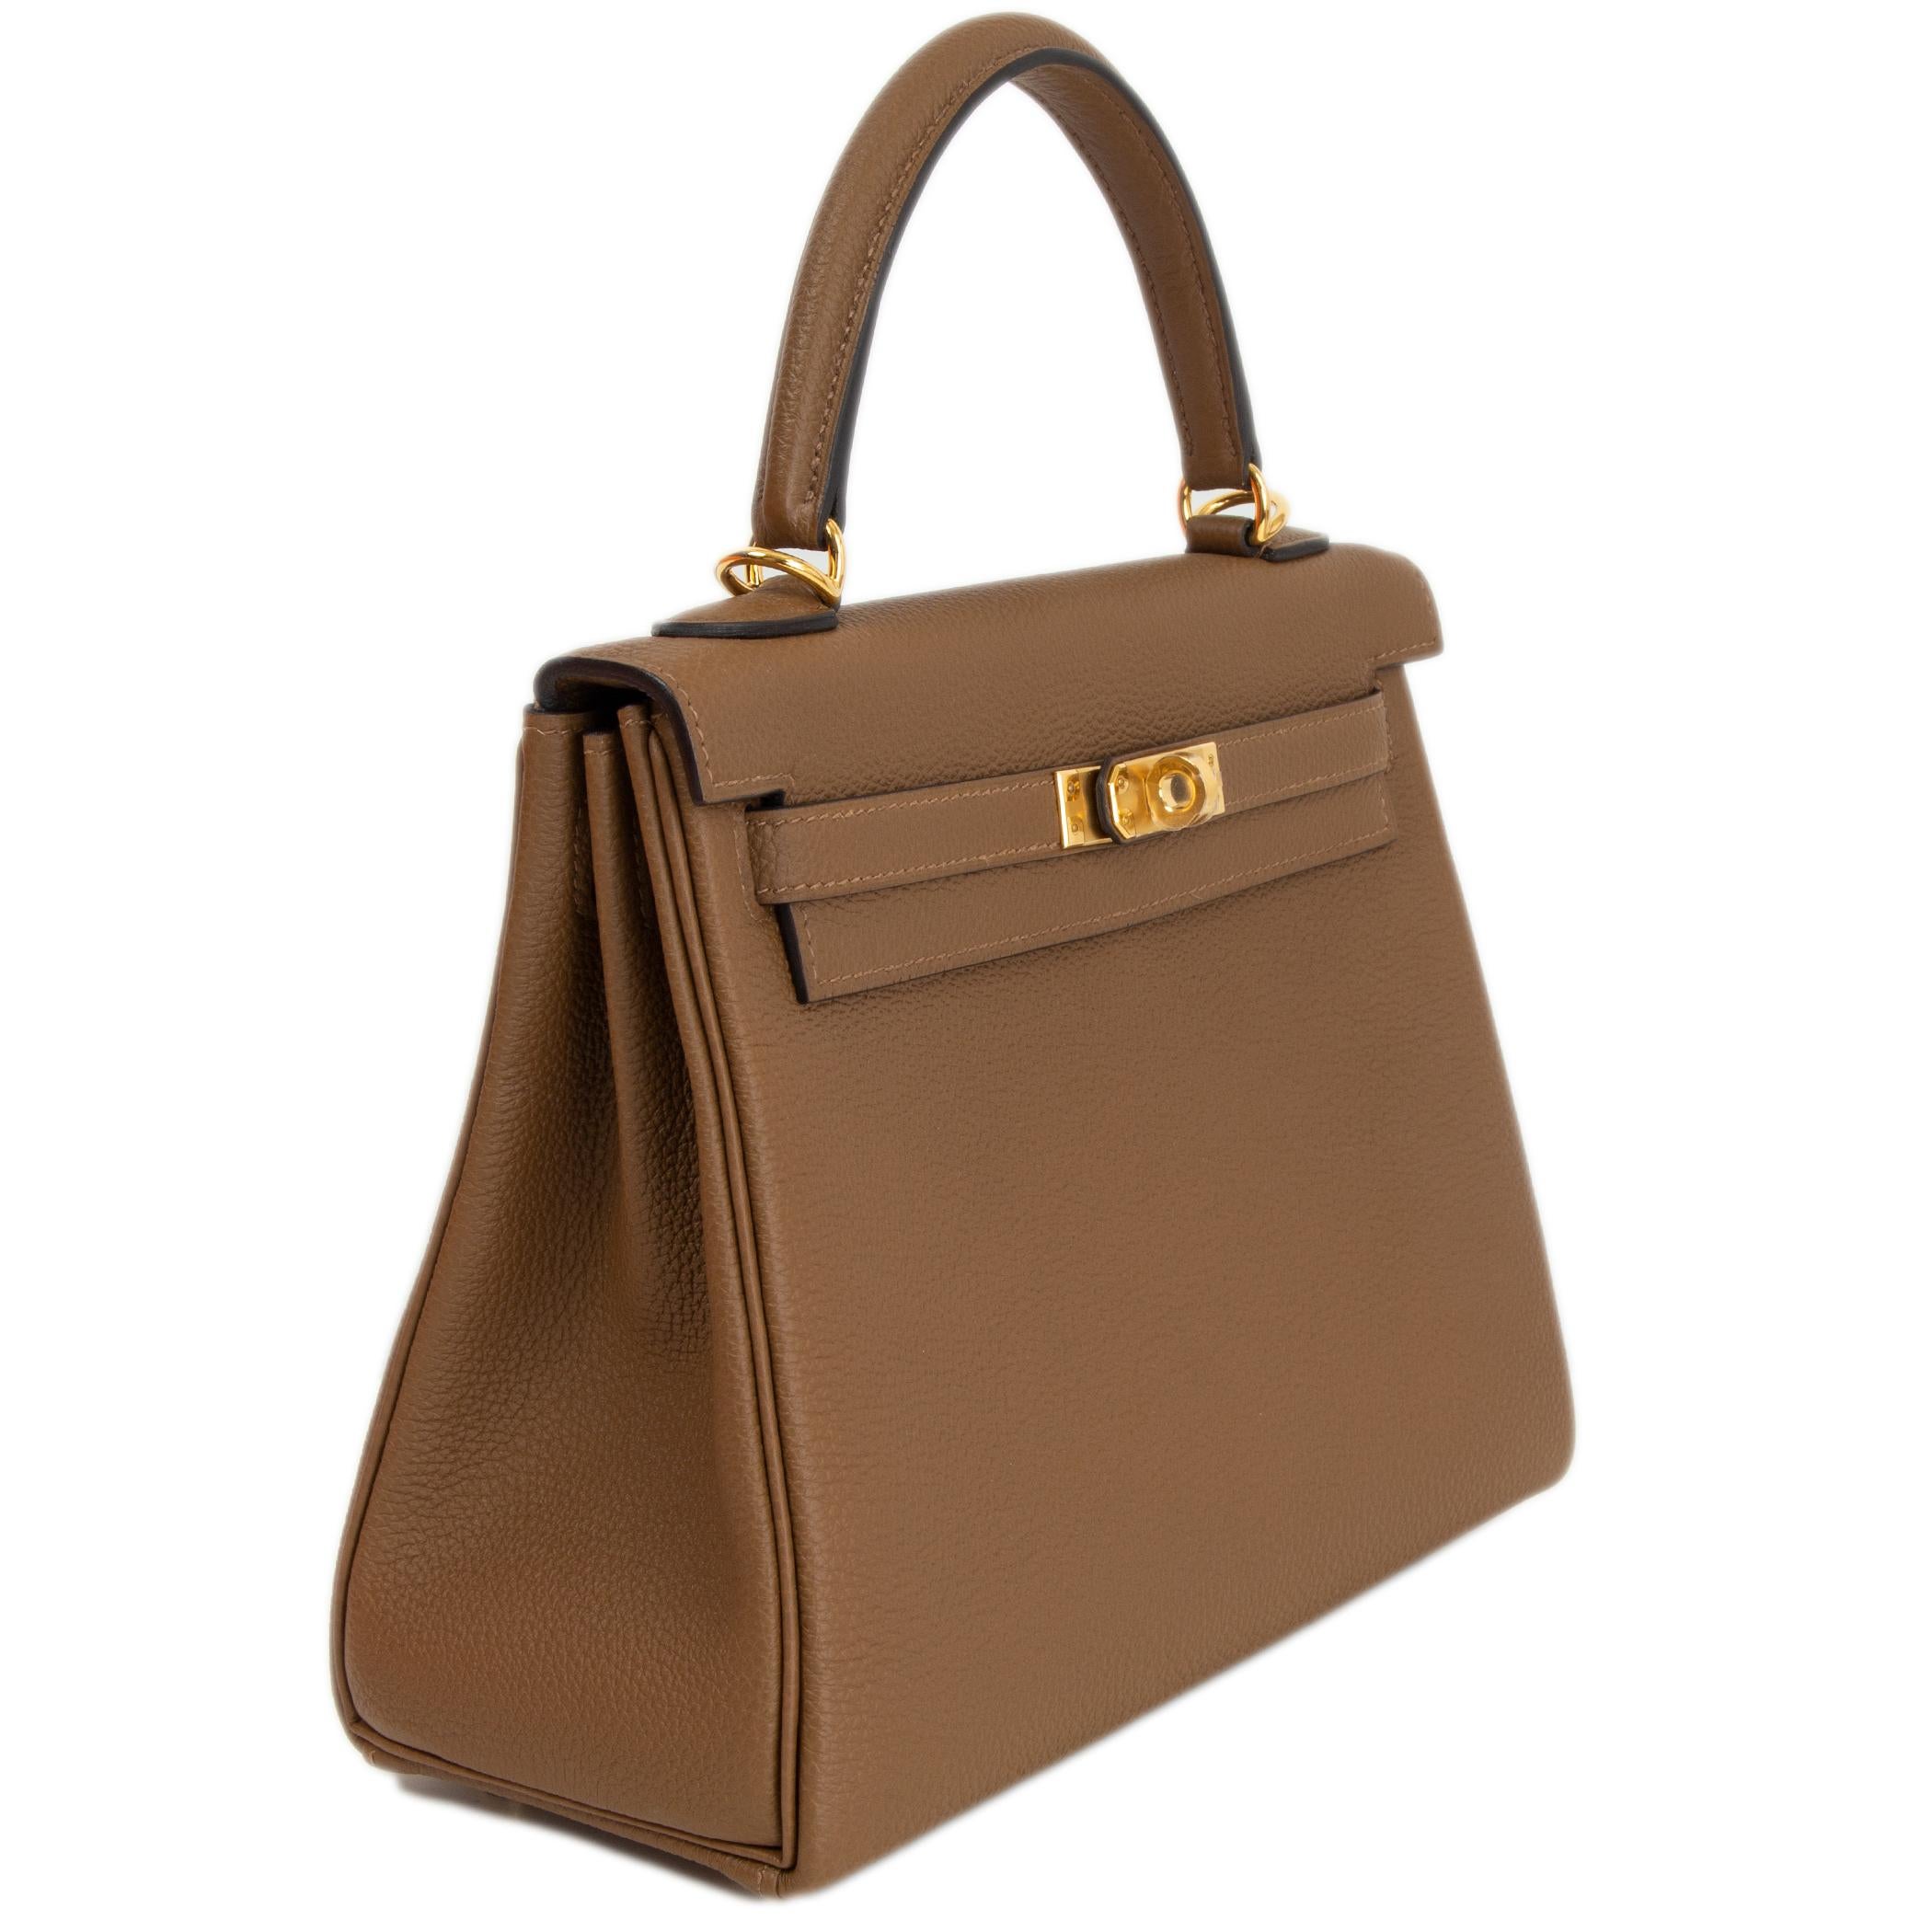 100% authentic Hermès Kelly 25 Retourne bag in Alezan (medium brown) Veau Togo leather featuring gold-plated hardware. Lined in Chevre (goat skin) with an open pocket against the front and a zipper pocket against the back. Brand new. Full